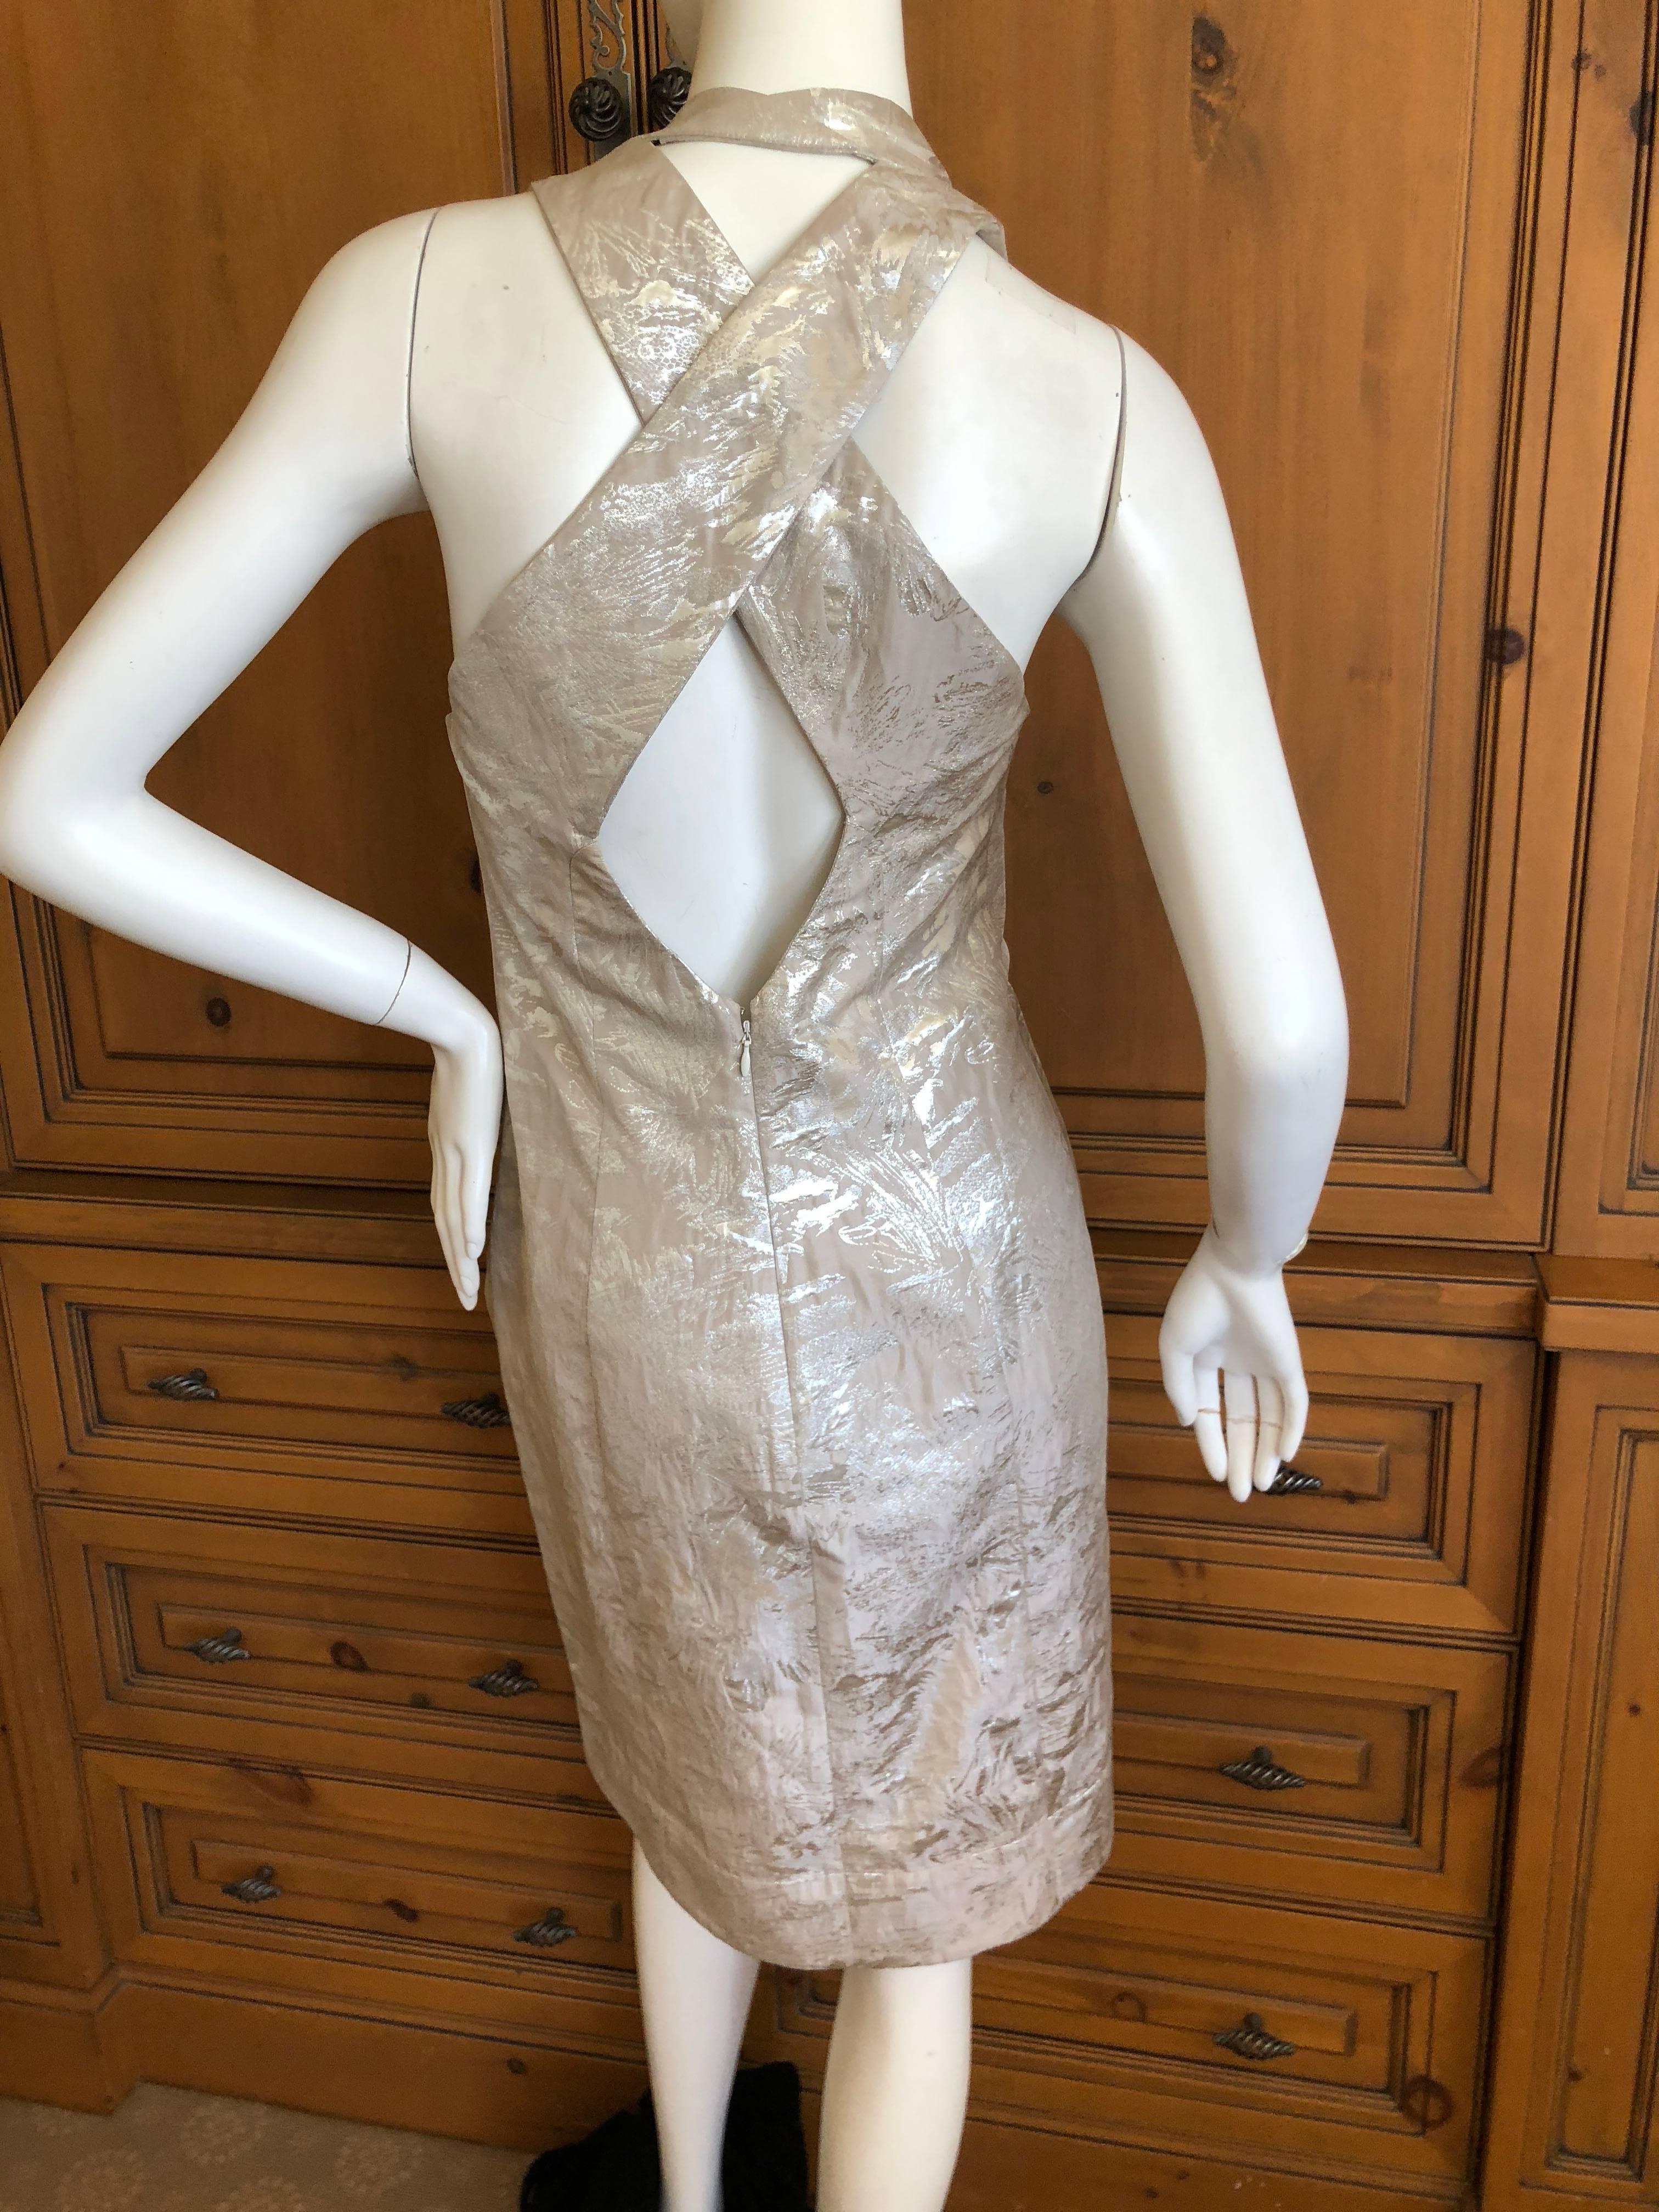 Vivienne Westwood Red Label Silver Brocade Dress with Cross Back
 New with Tags
Size 40
Bust 36'
Waist 29